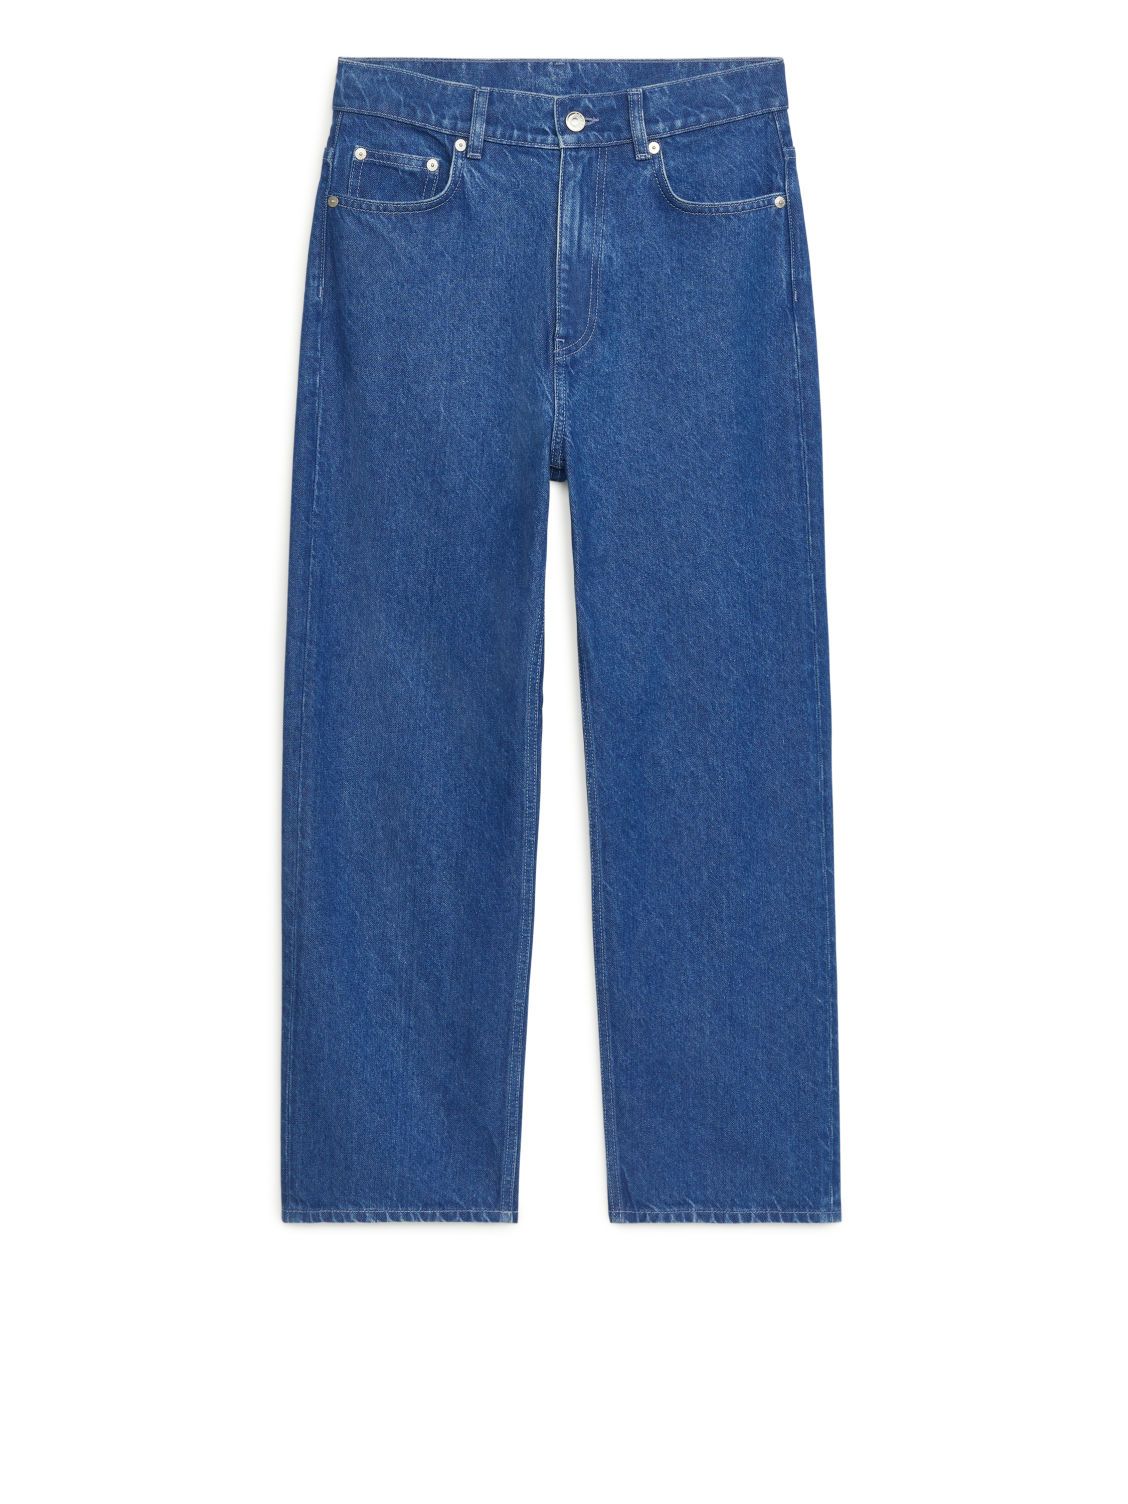 STRAIGHT CROPPED Jeans - Blue | ARKET (US&UK)